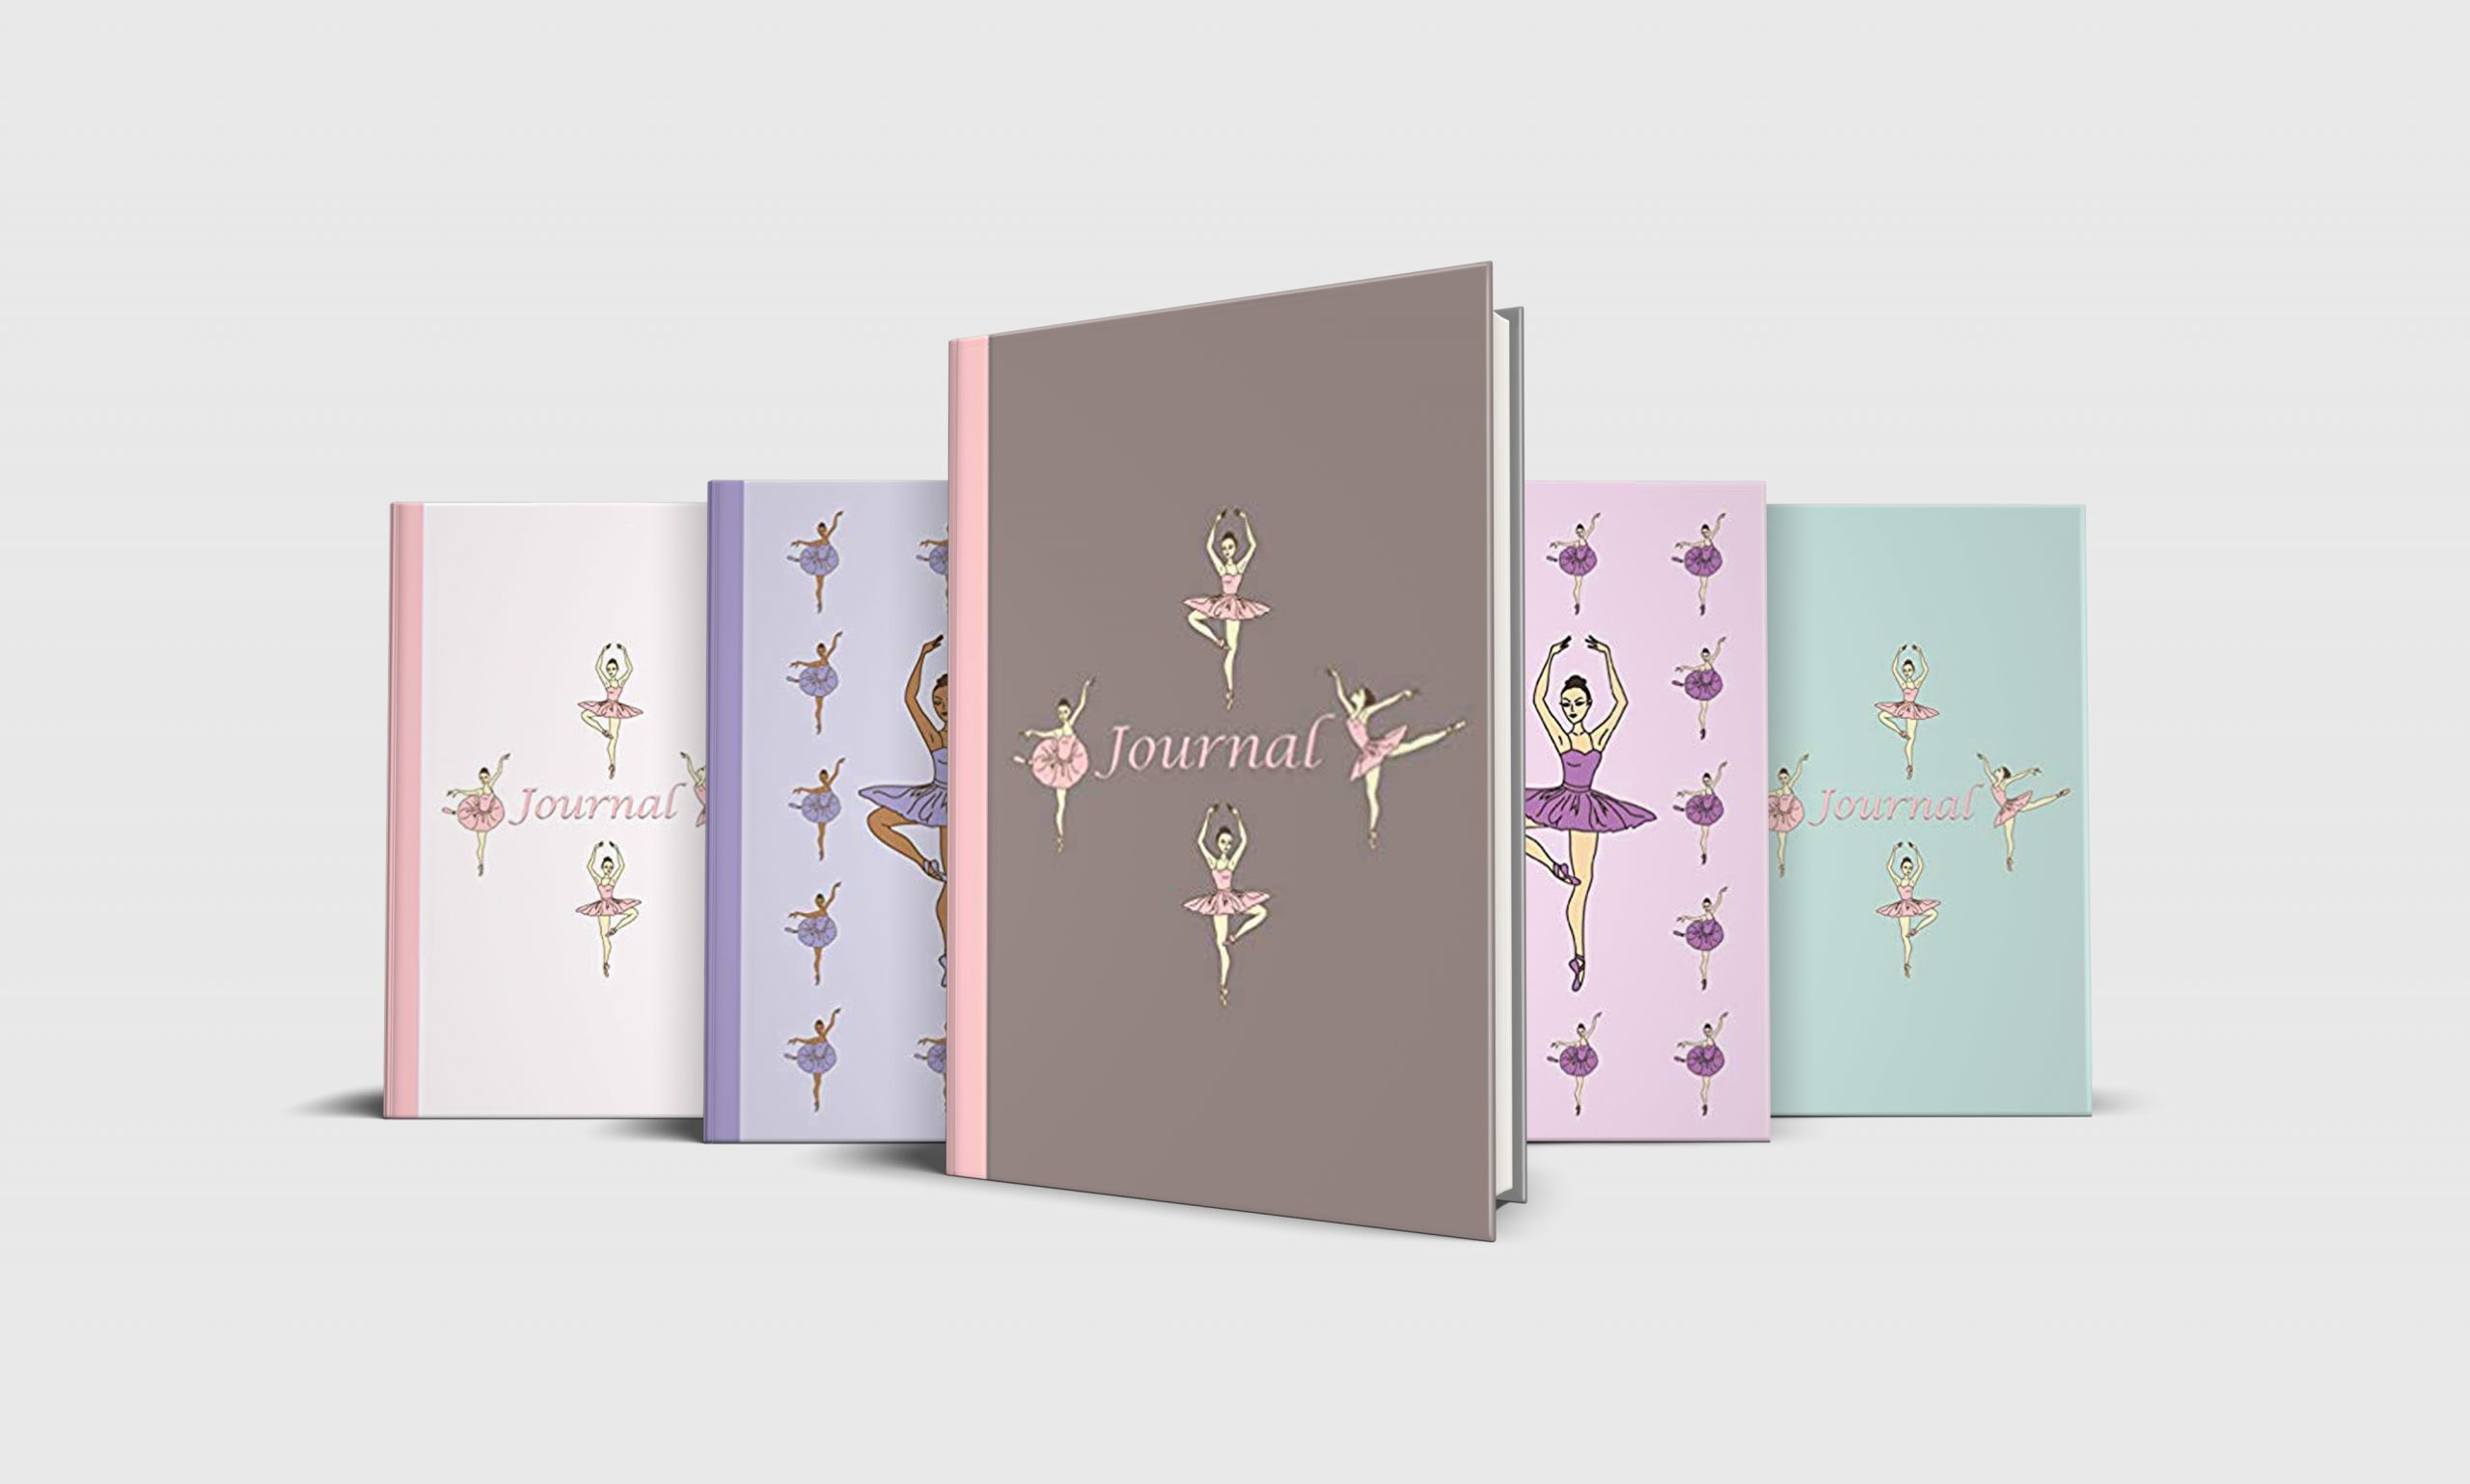 five journals with ballerinas on the cover. highlights journals in pink, tan, purple, green and blue.